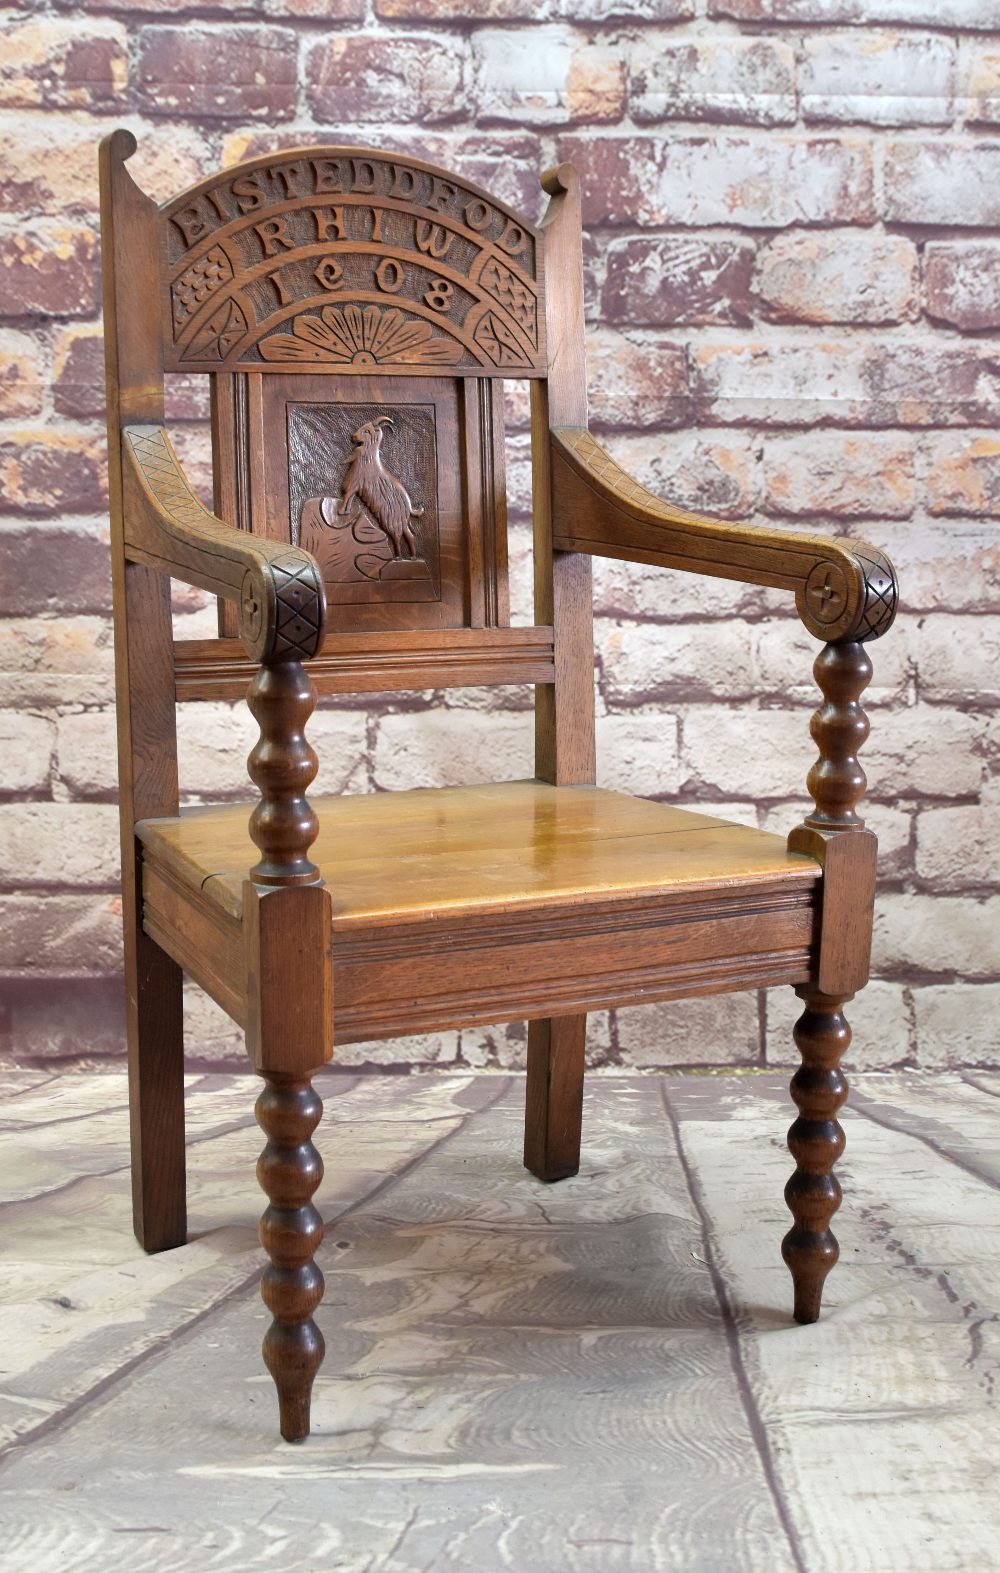 EISTEDDFOD CHAIR 1908 with carved panel of mountain goat, inscribed Eisteddfod Rhiw 1908 (with